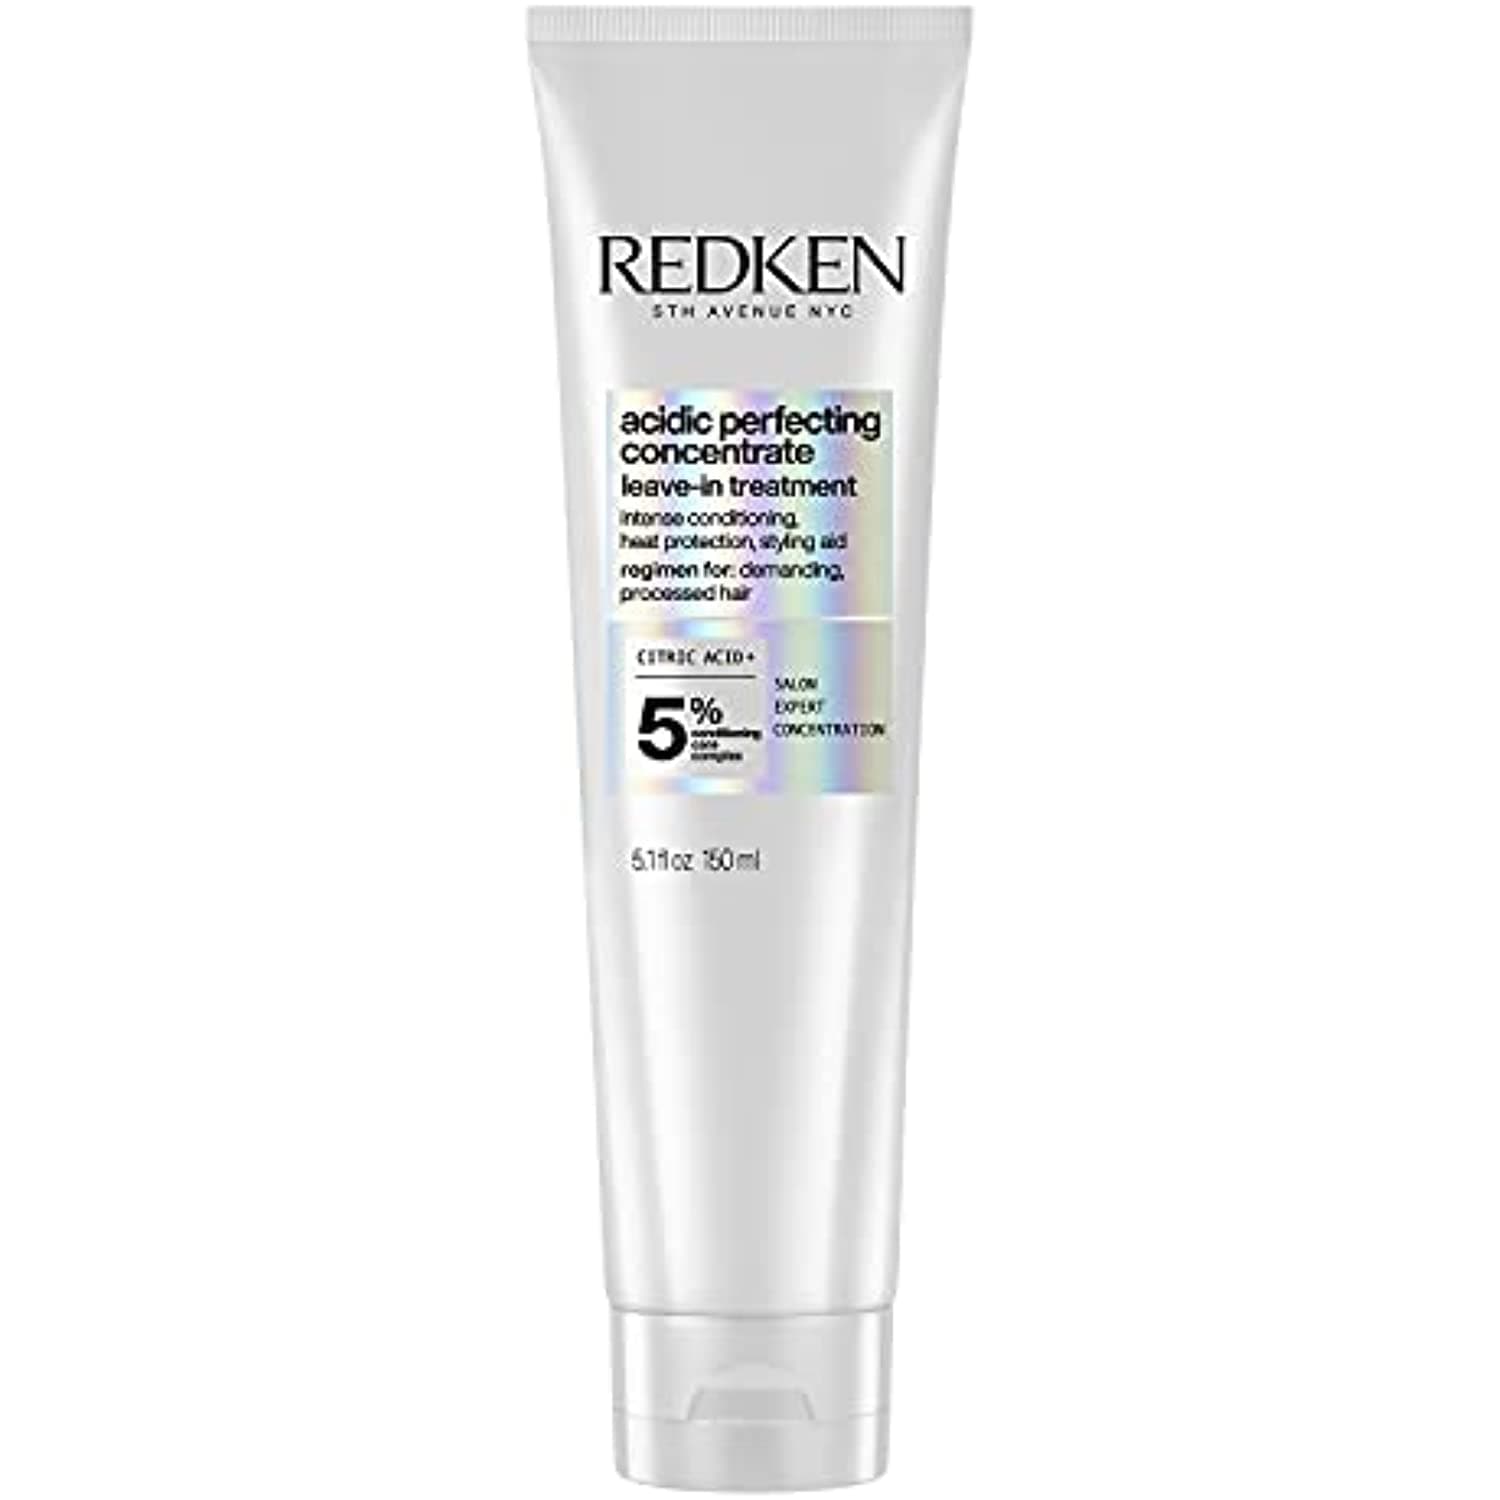 Redken Leave In Conditioner for Damaged Hair Repair 5 oz